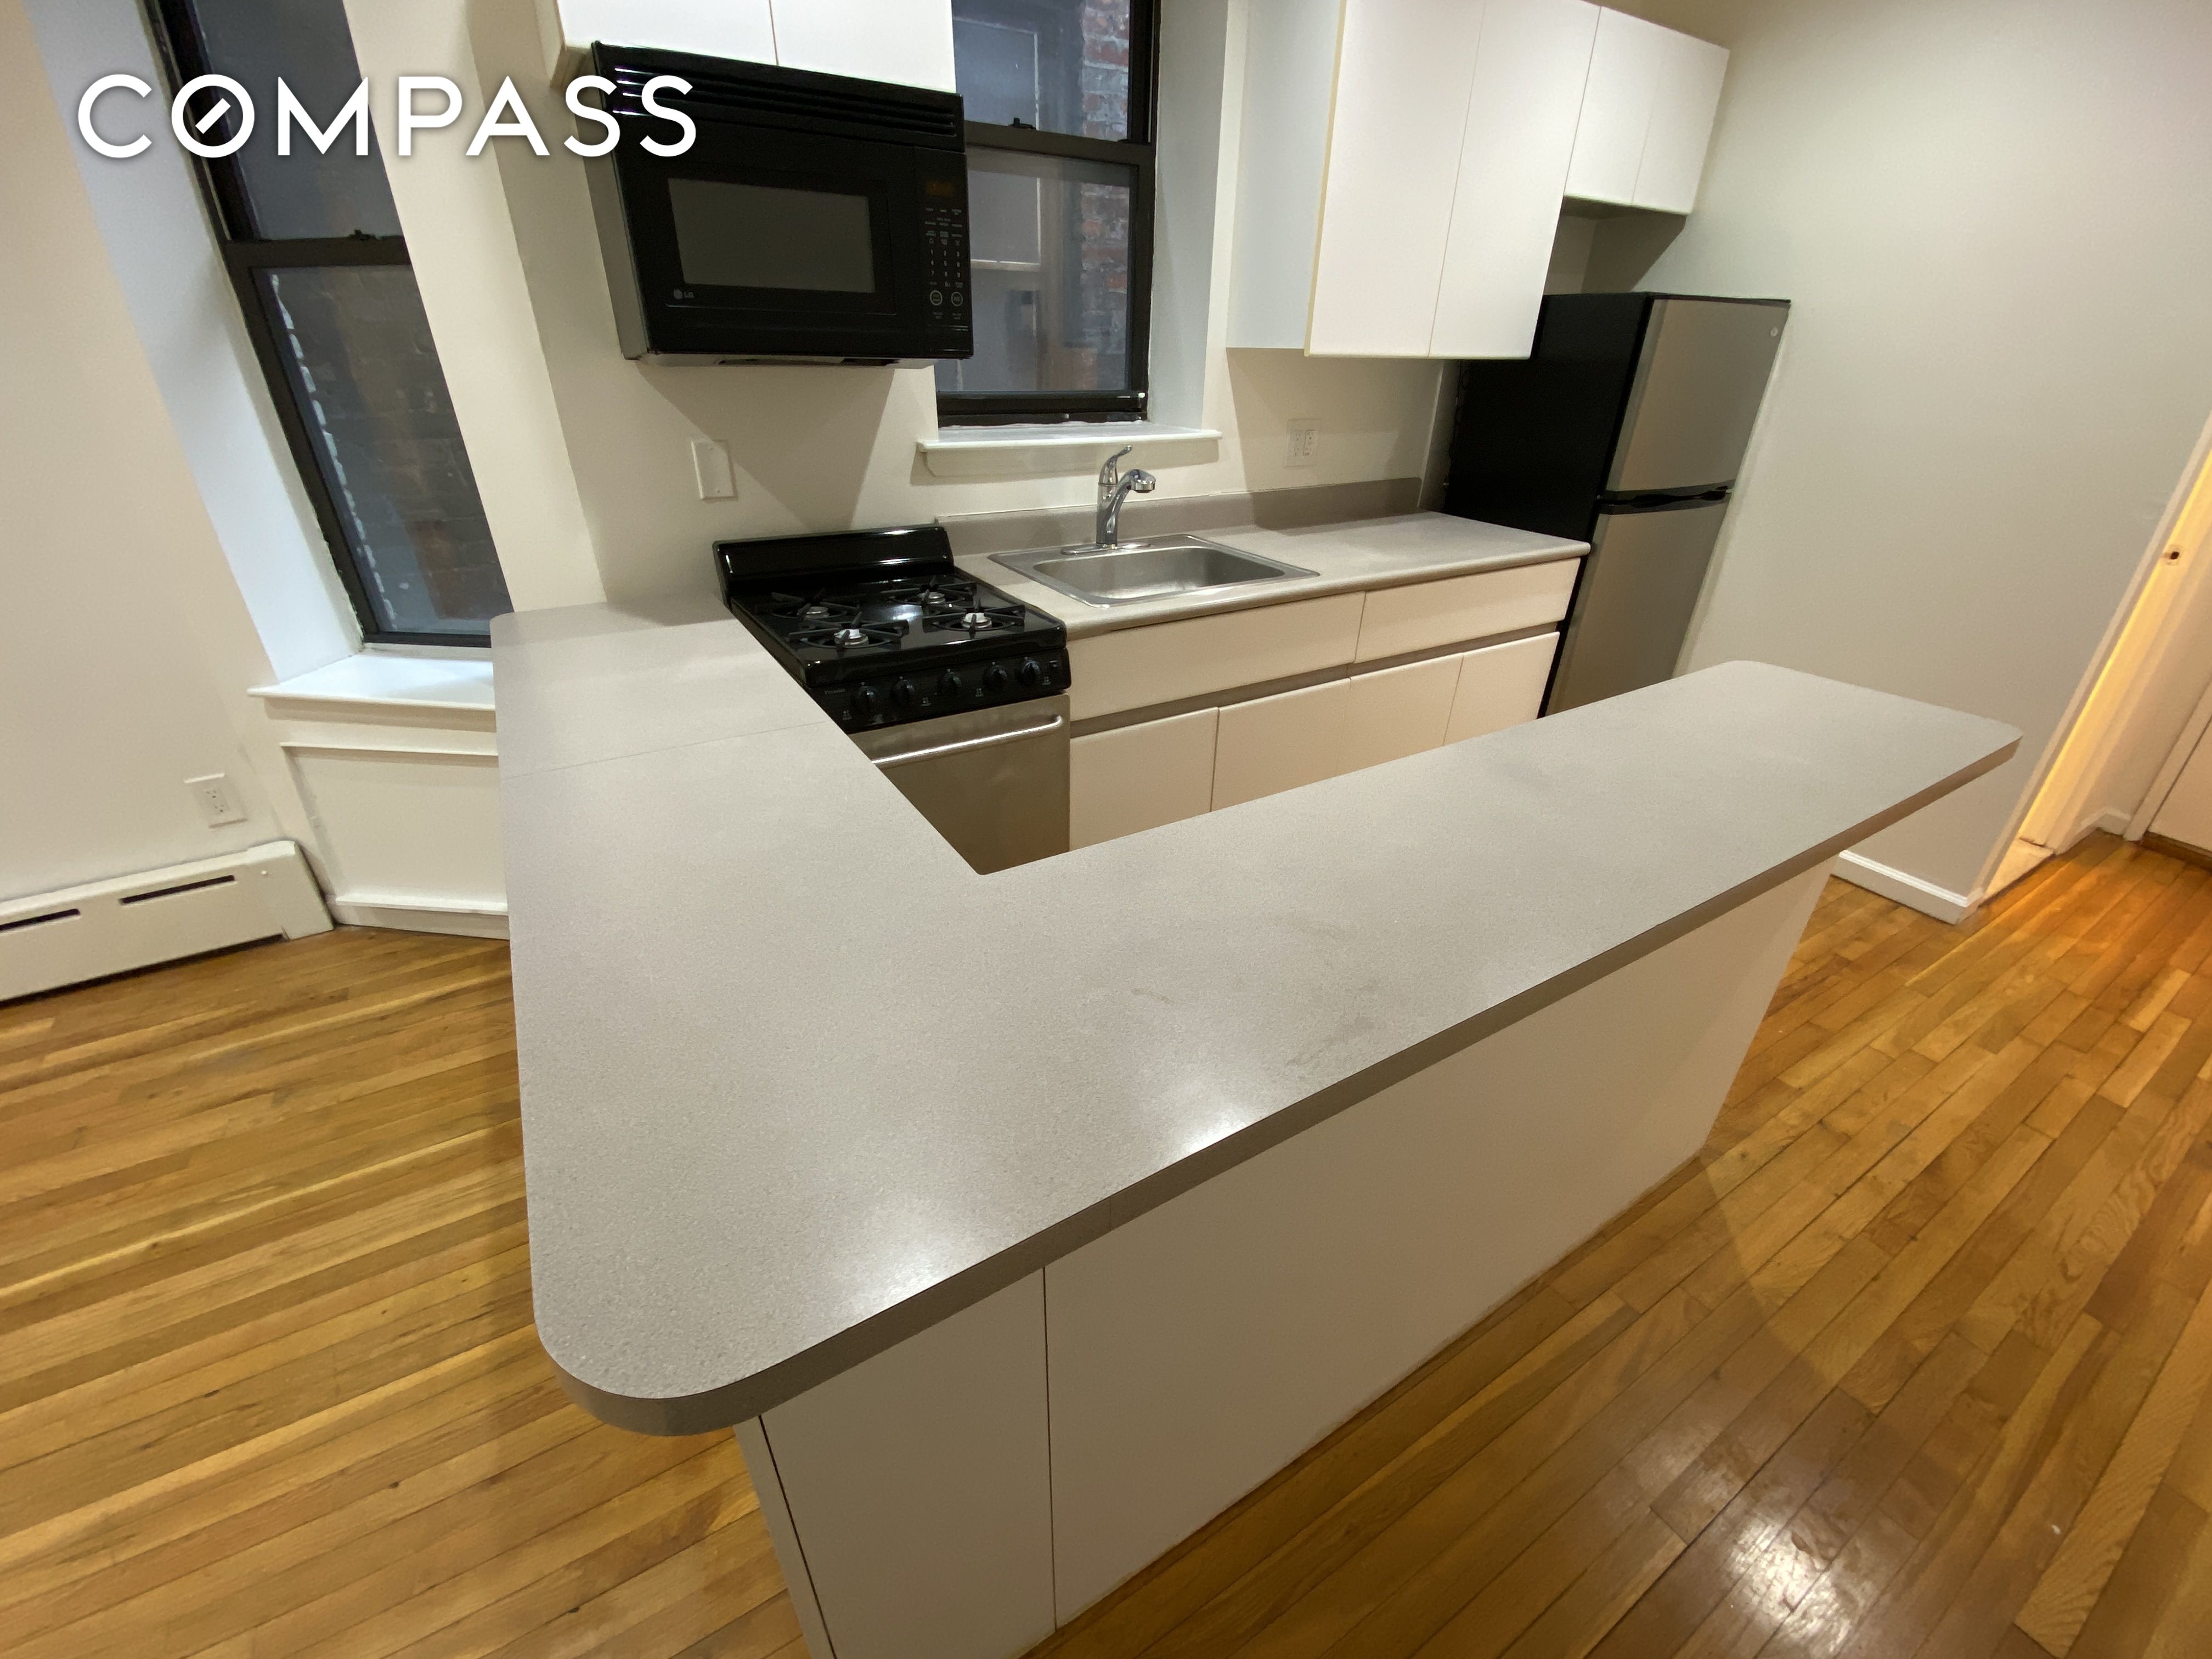 423 East 75th Street 1A, Upper East Side, Upper East Side, NYC - 3 Bedrooms  
2 Bathrooms  
2 Rooms - 